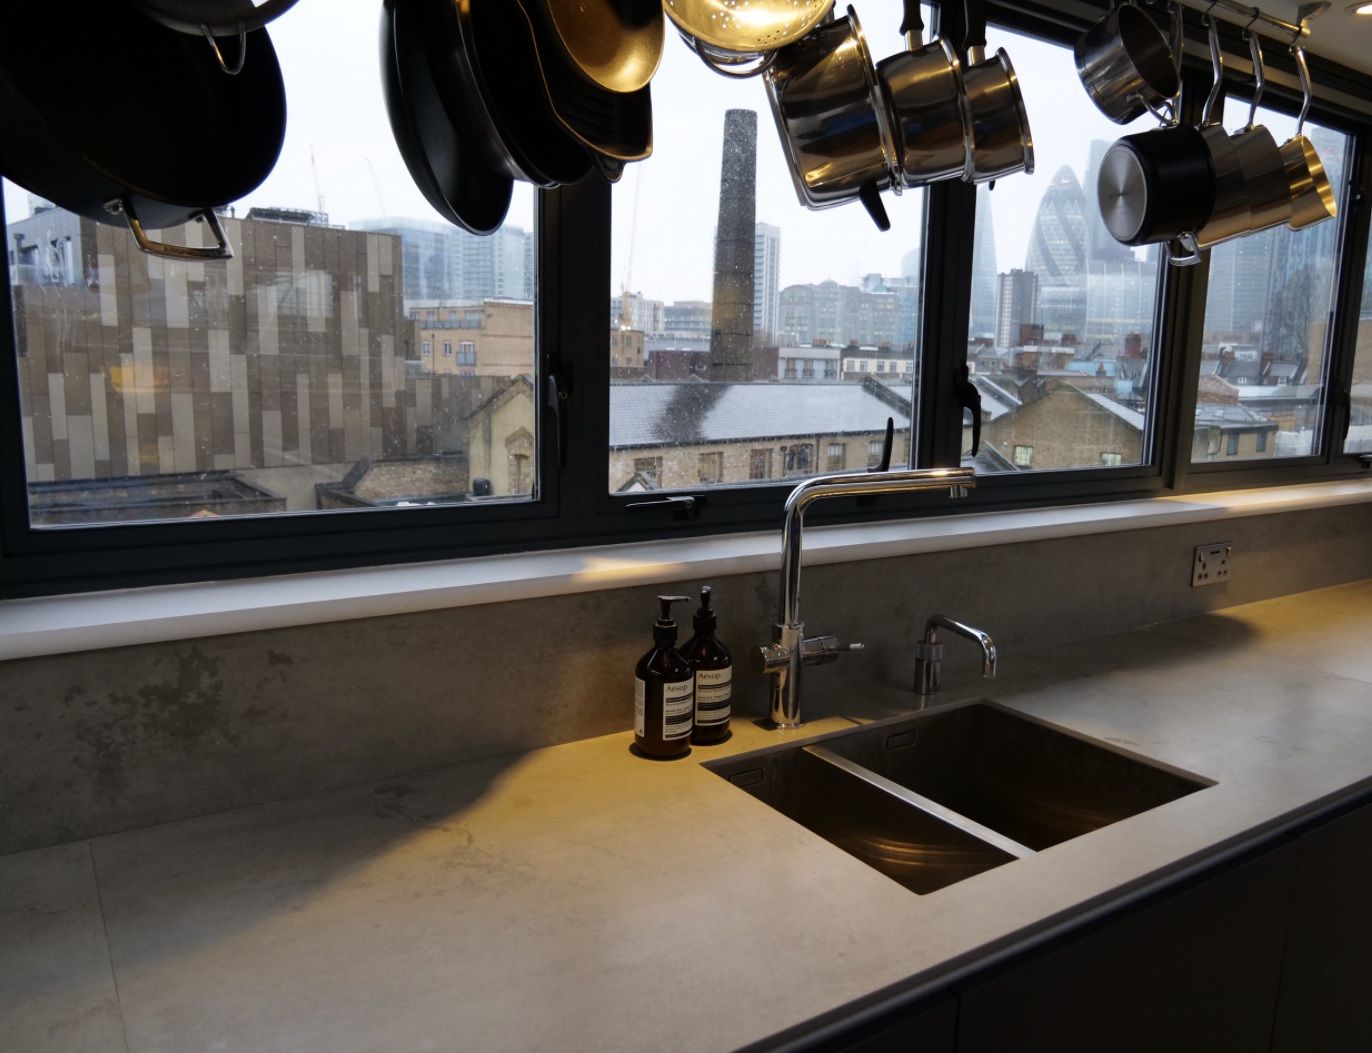 Neolith Worktops in Shoreditch, London The Worktop Library Built-in kitchens Ceramic neolith, neolith beton, sintered stone, kitchen worktop, industrial kitchen, kitchen design, neolith countertop, cement worktop, concrete worktop, concrete countertop, worktop library